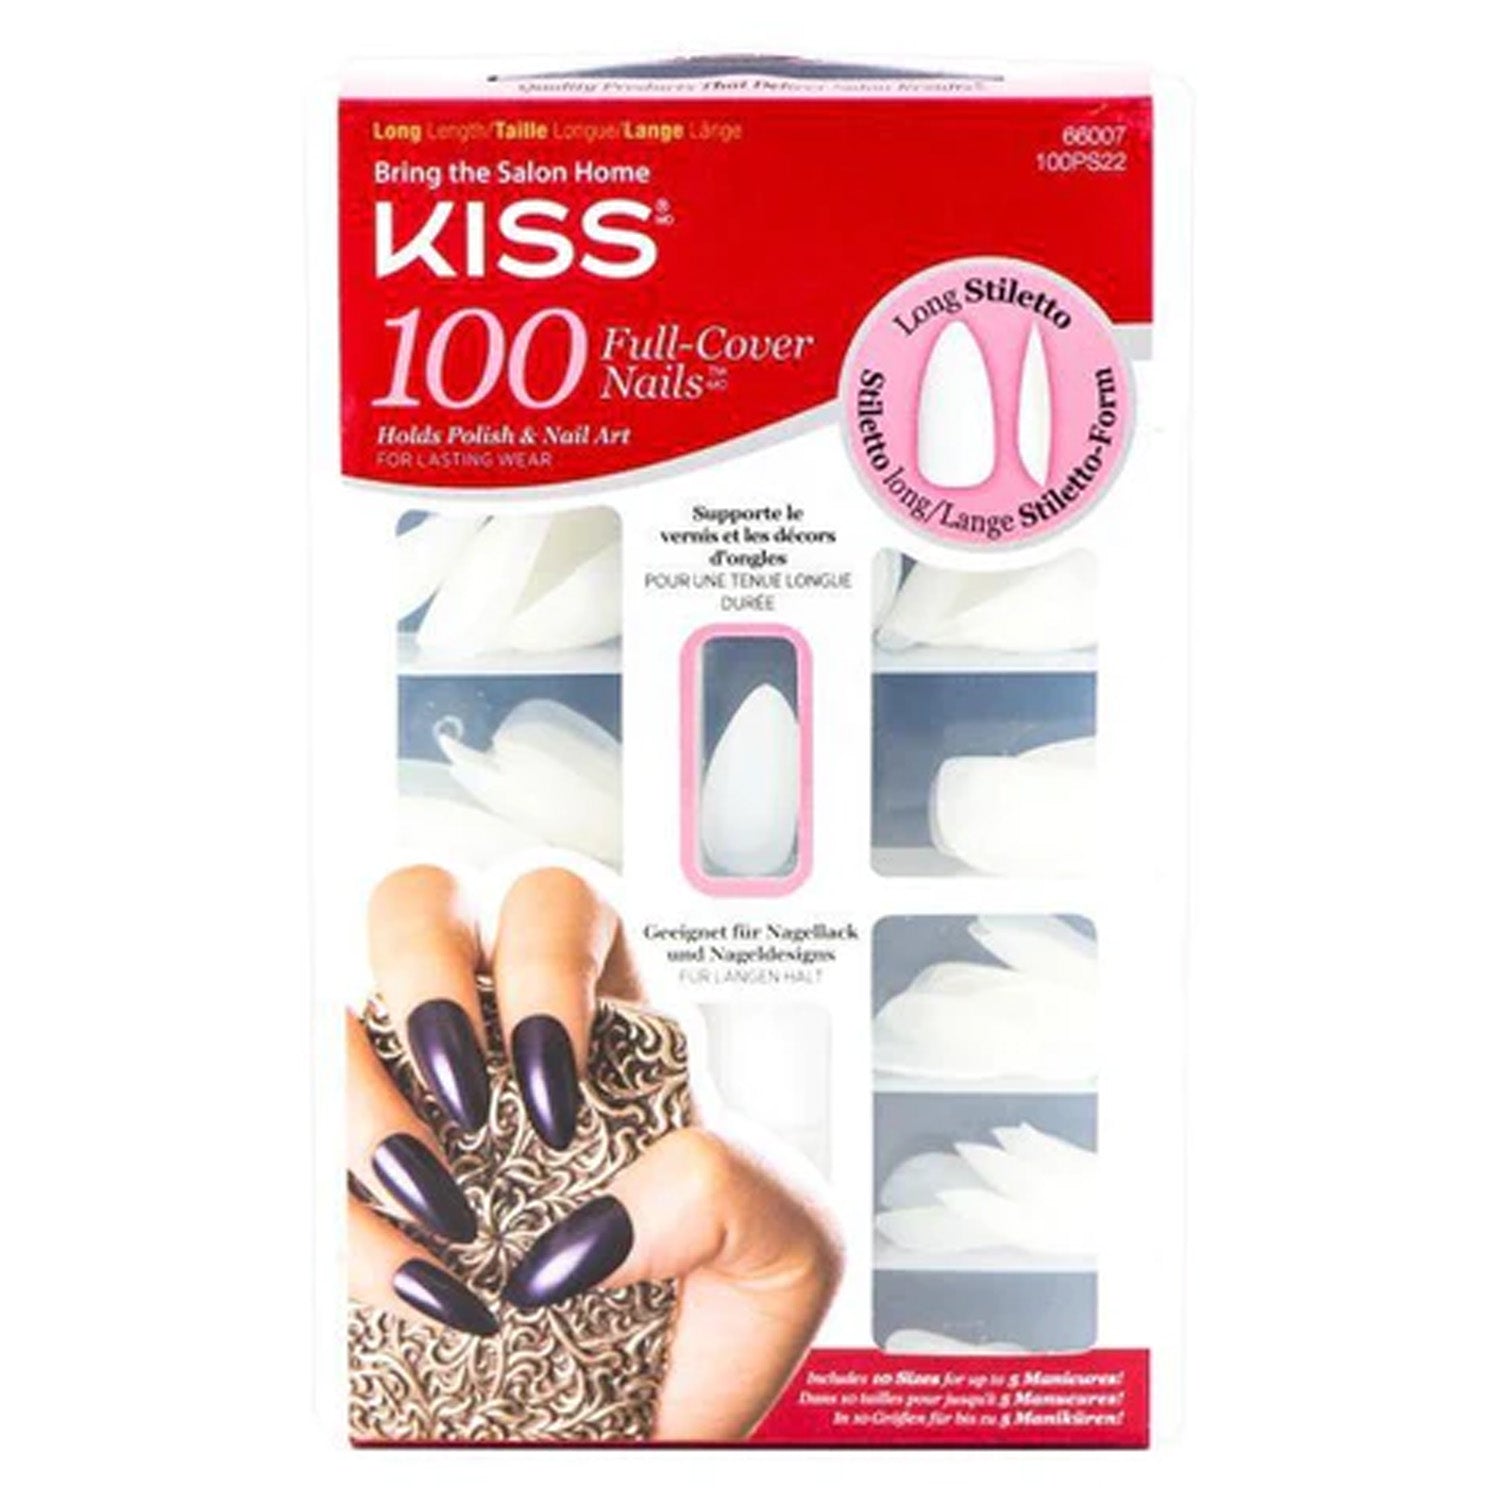 KISS 100 FULL-COVER NAILS LONG STILETTO #100PS22